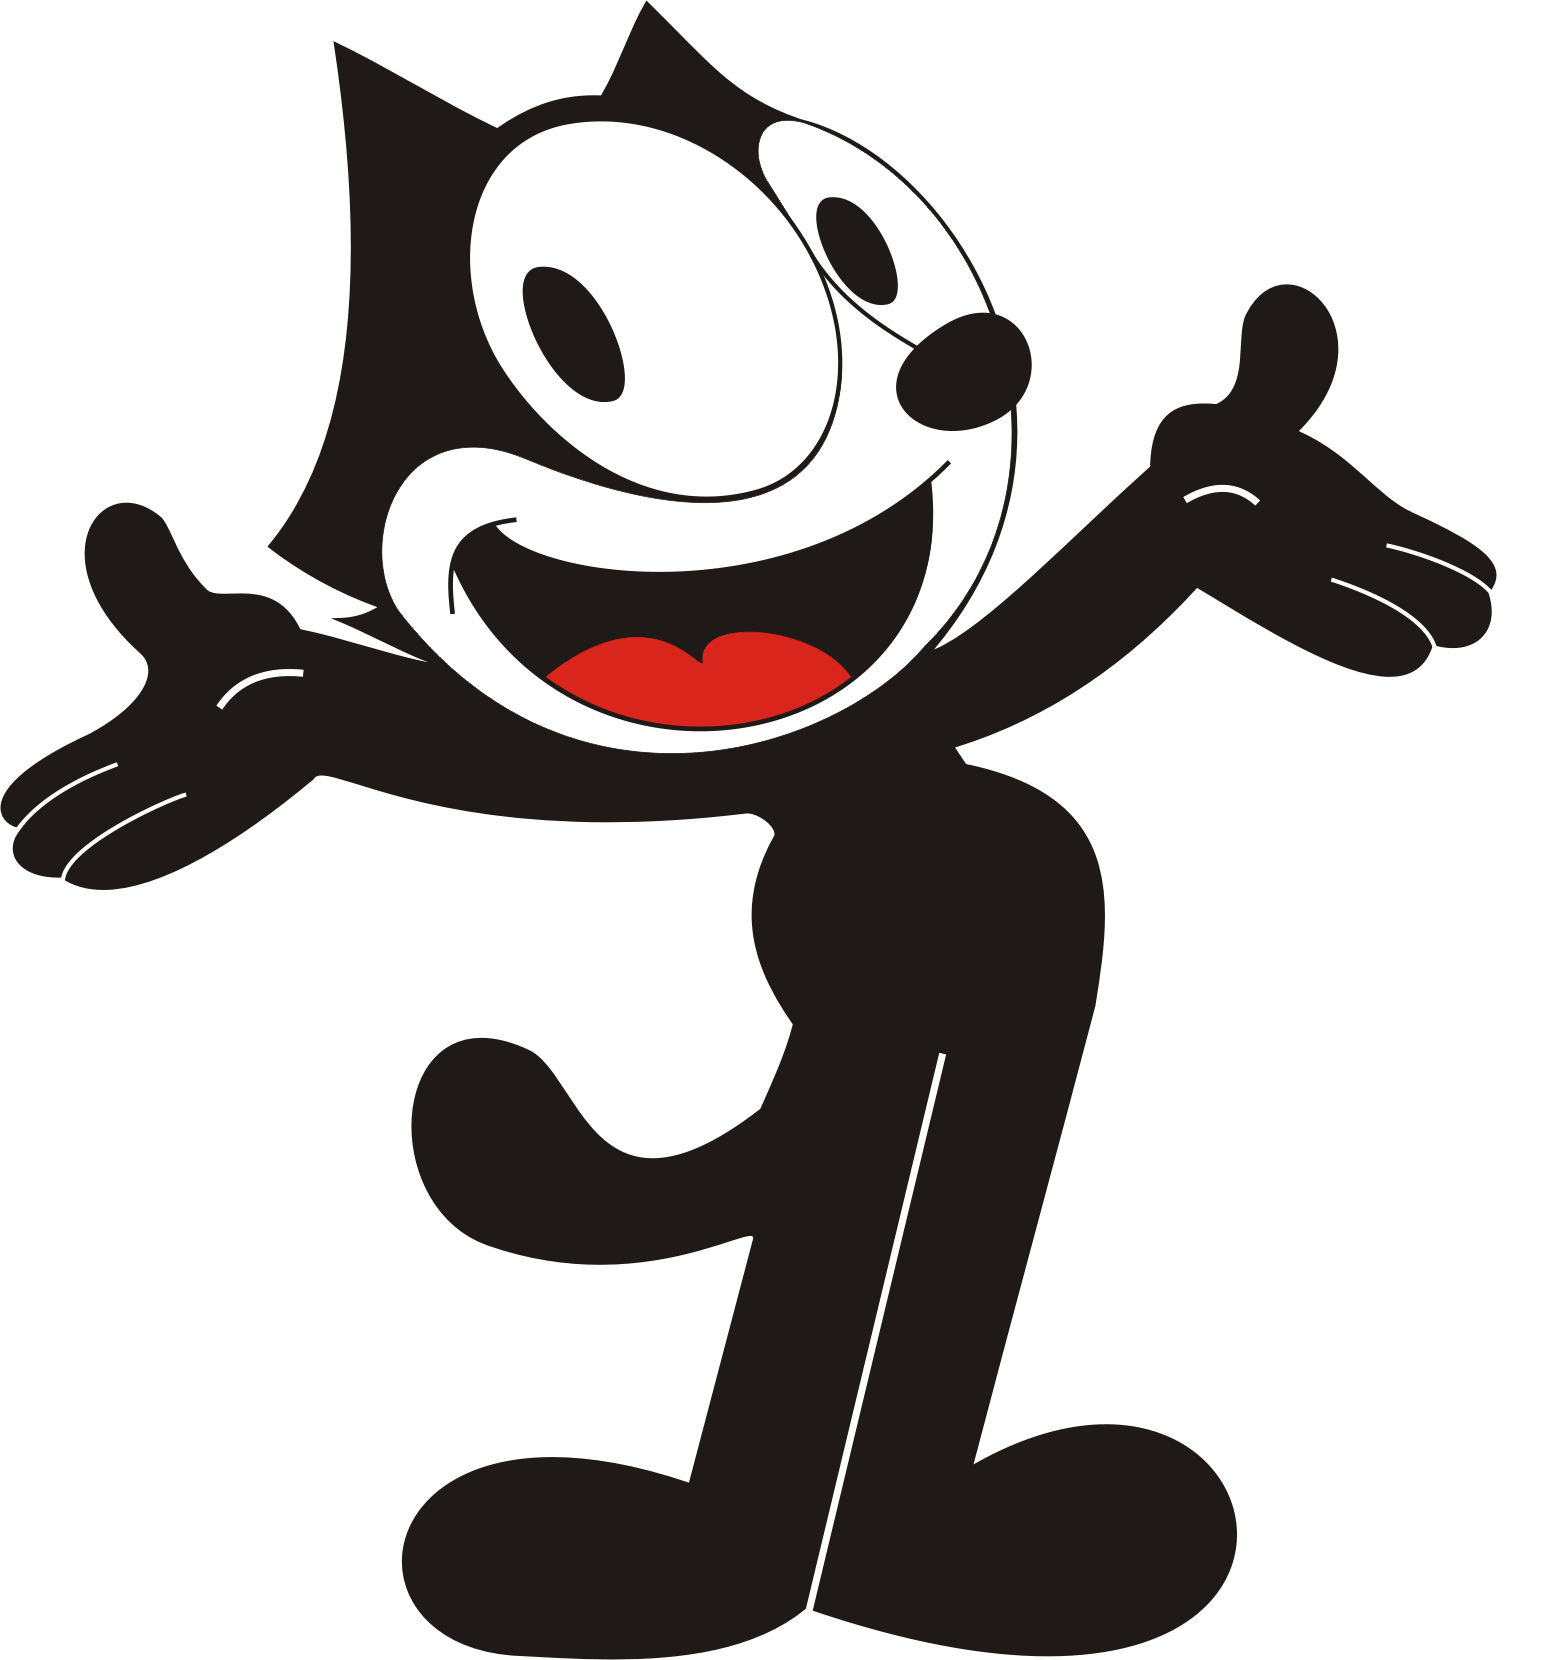 Any love for Felix the Cat?